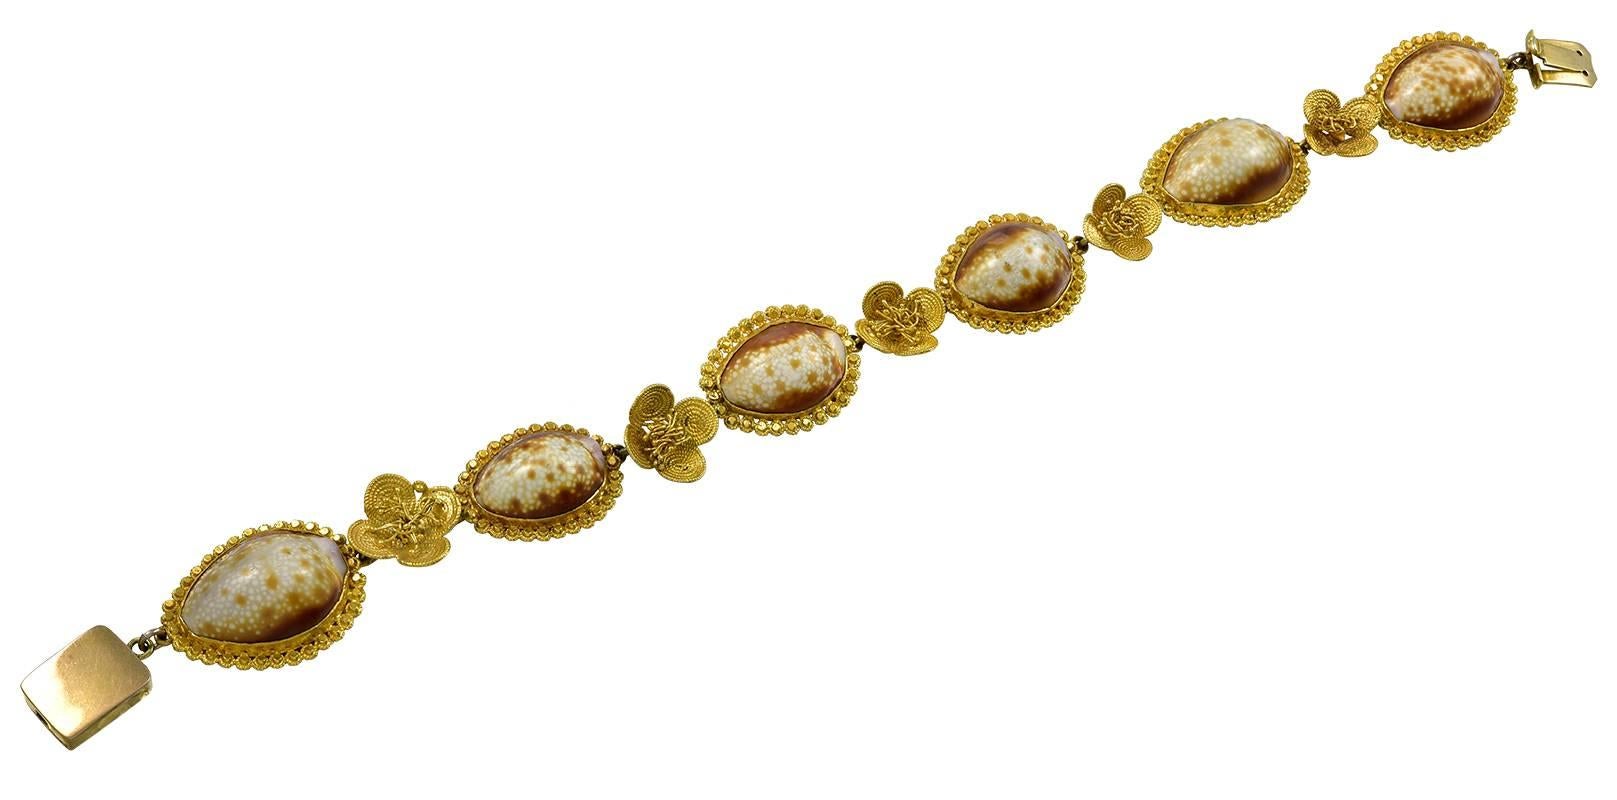 The 6 Cowrie Shells are set in hand made Gold Canatille Work frames, alternating with Gold Buttercup Flowers to a square box clasp.
In 18th century England, people were intrigued with the exotic Cowrie Shells, which were brought back by returning